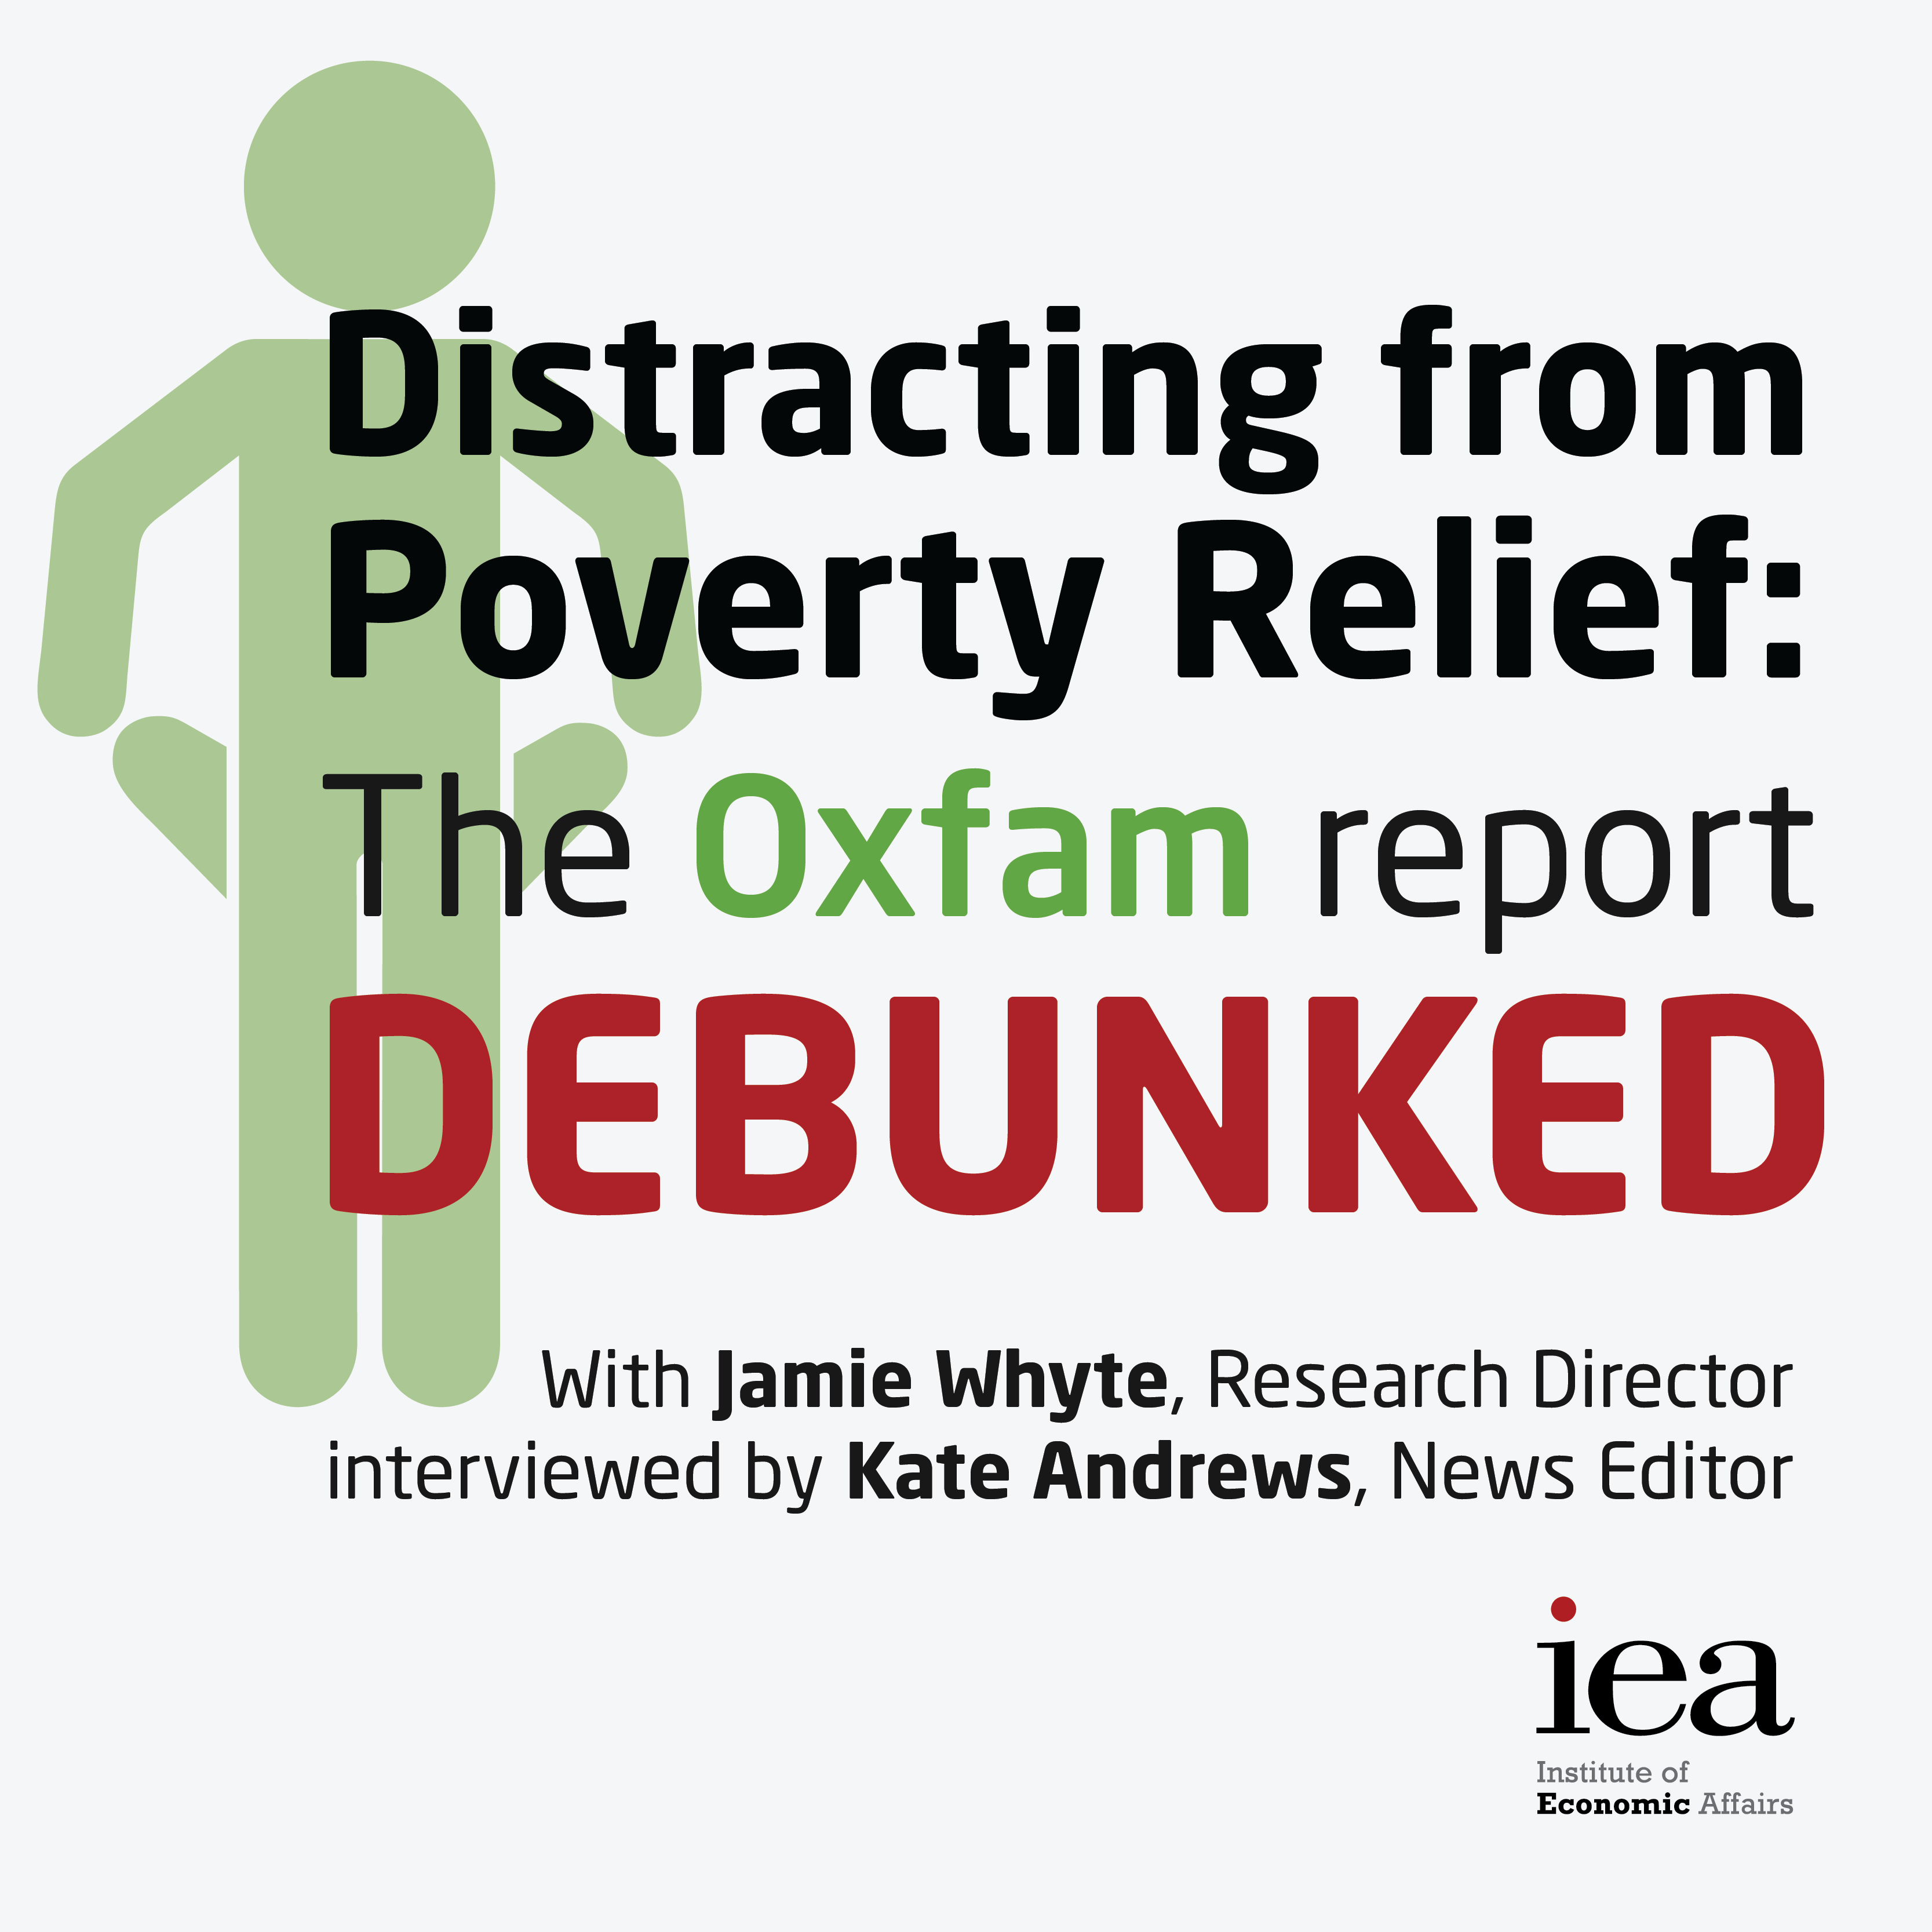 Distracting from Poverty Relief: The Oxfam report debunked 